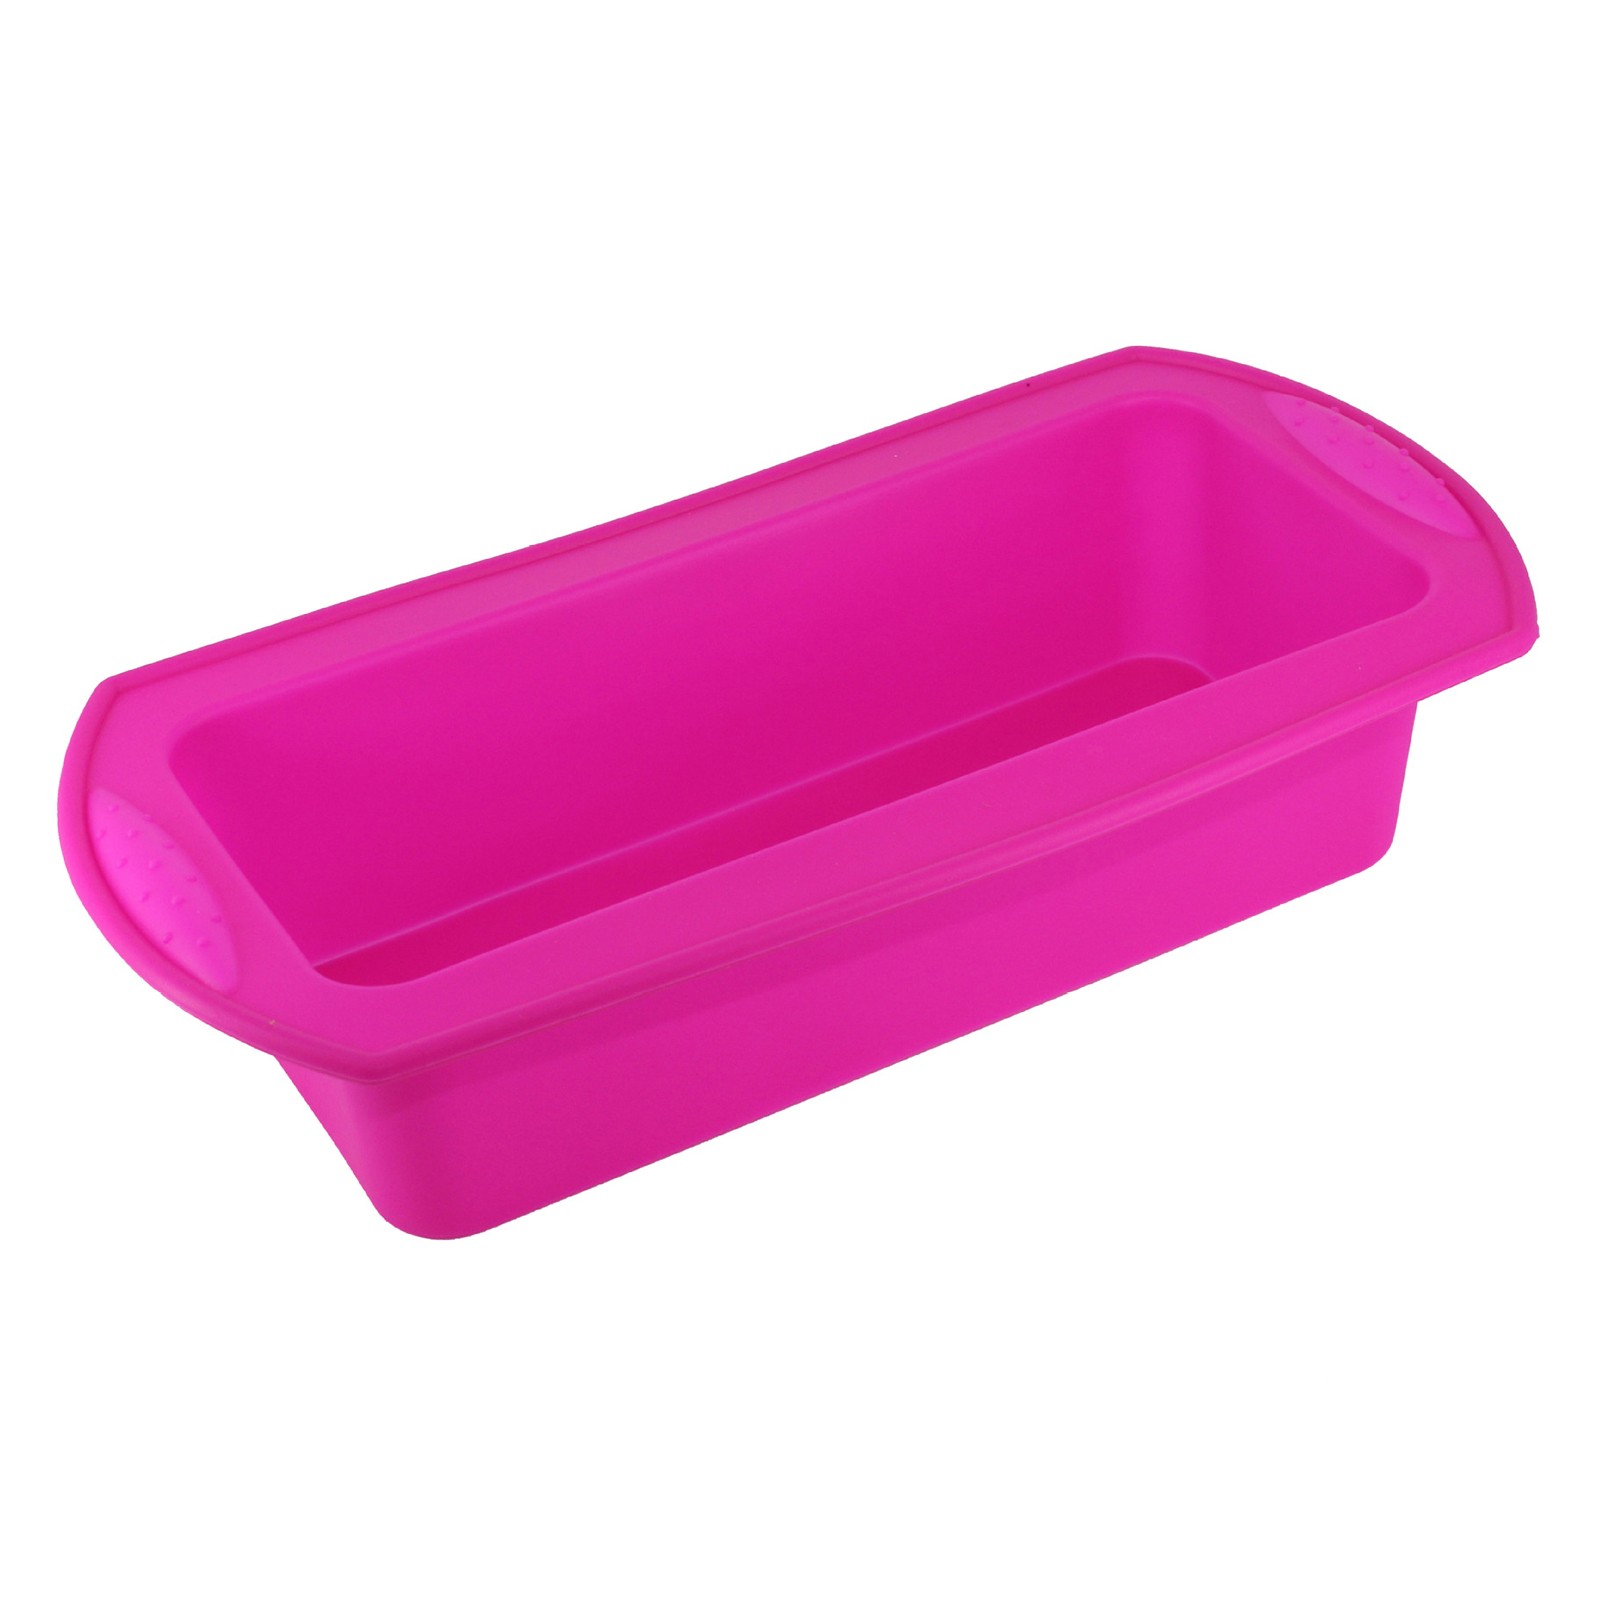 1PC Silicone Cake Mold Pan Muffin Chocolate Pizza Baking Tray Mould for Baking Sponge Chiffon Mousse Kitchen Cake Mold